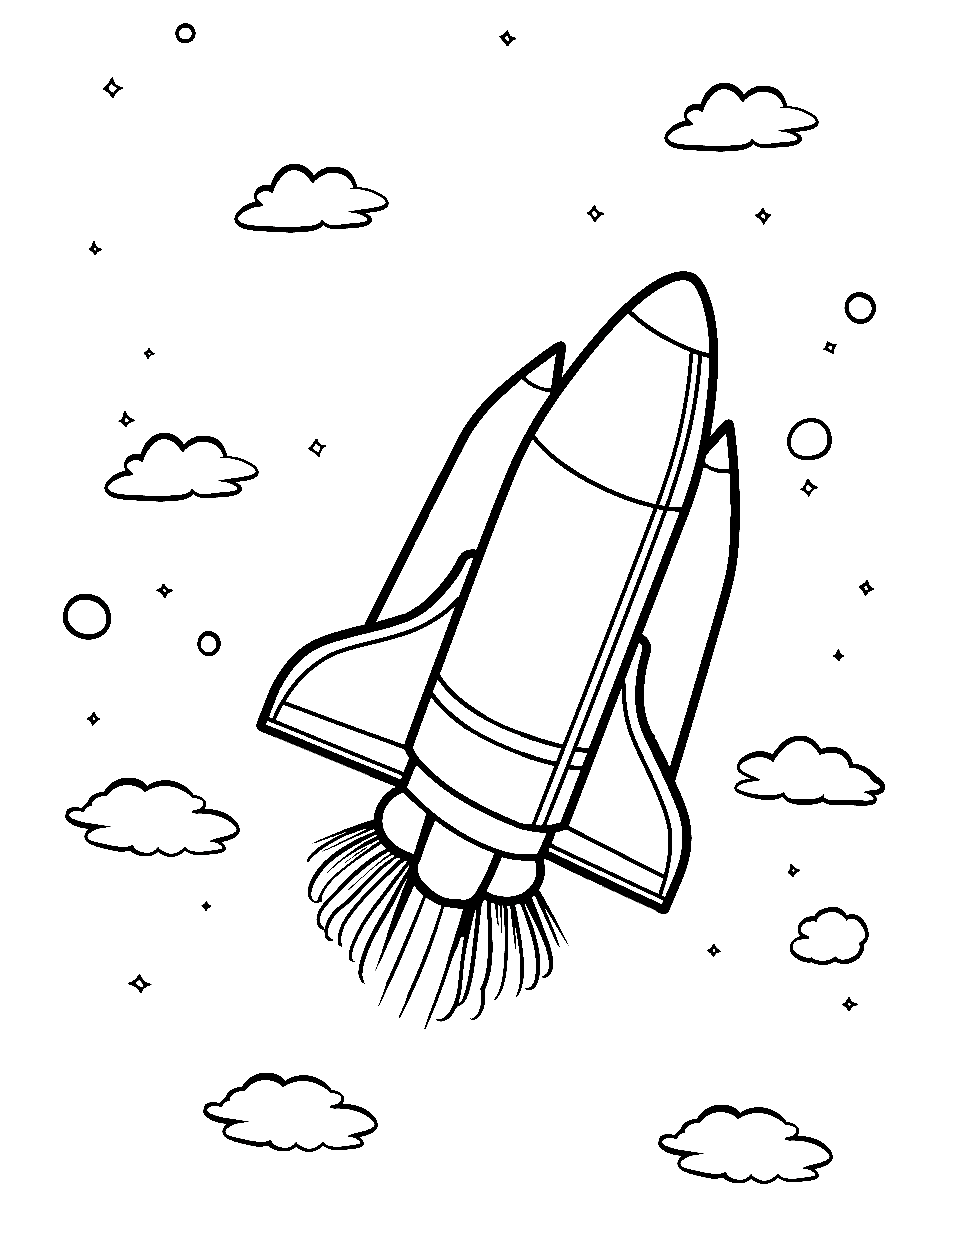 Space Shuttle Soaring Coloring Page - A space shuttle zooming upwards.